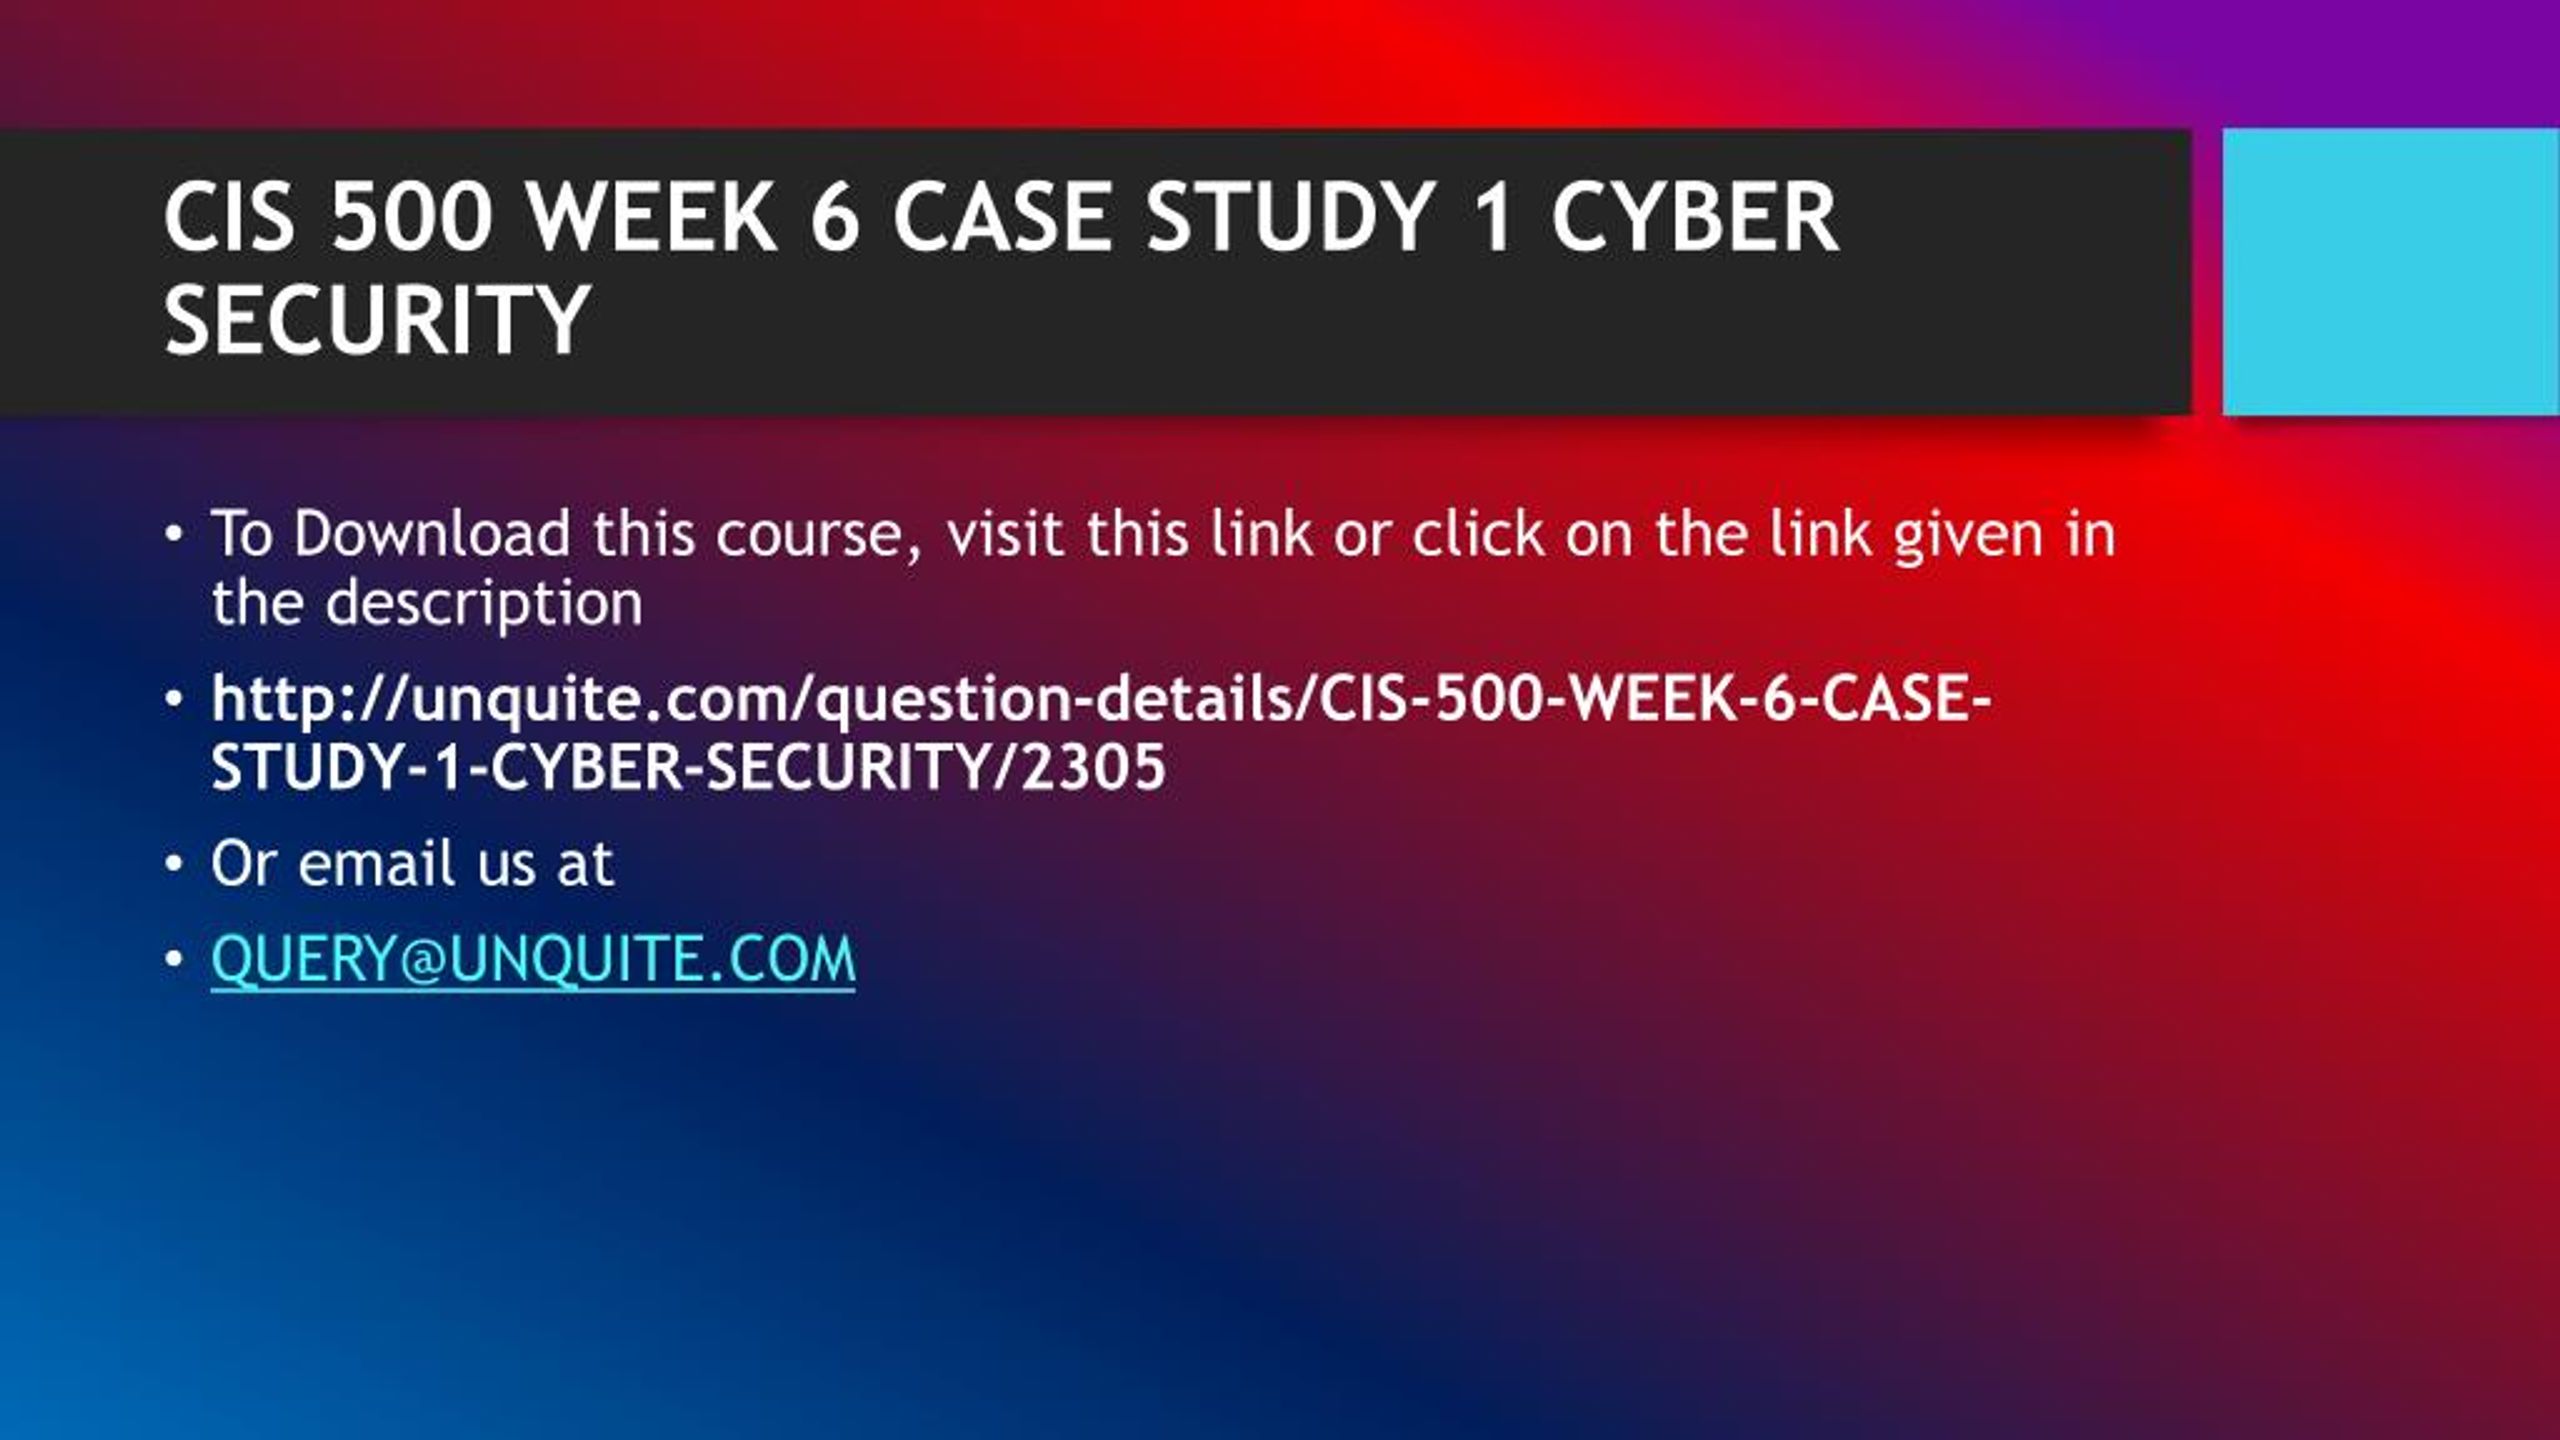 cyber security case study questions